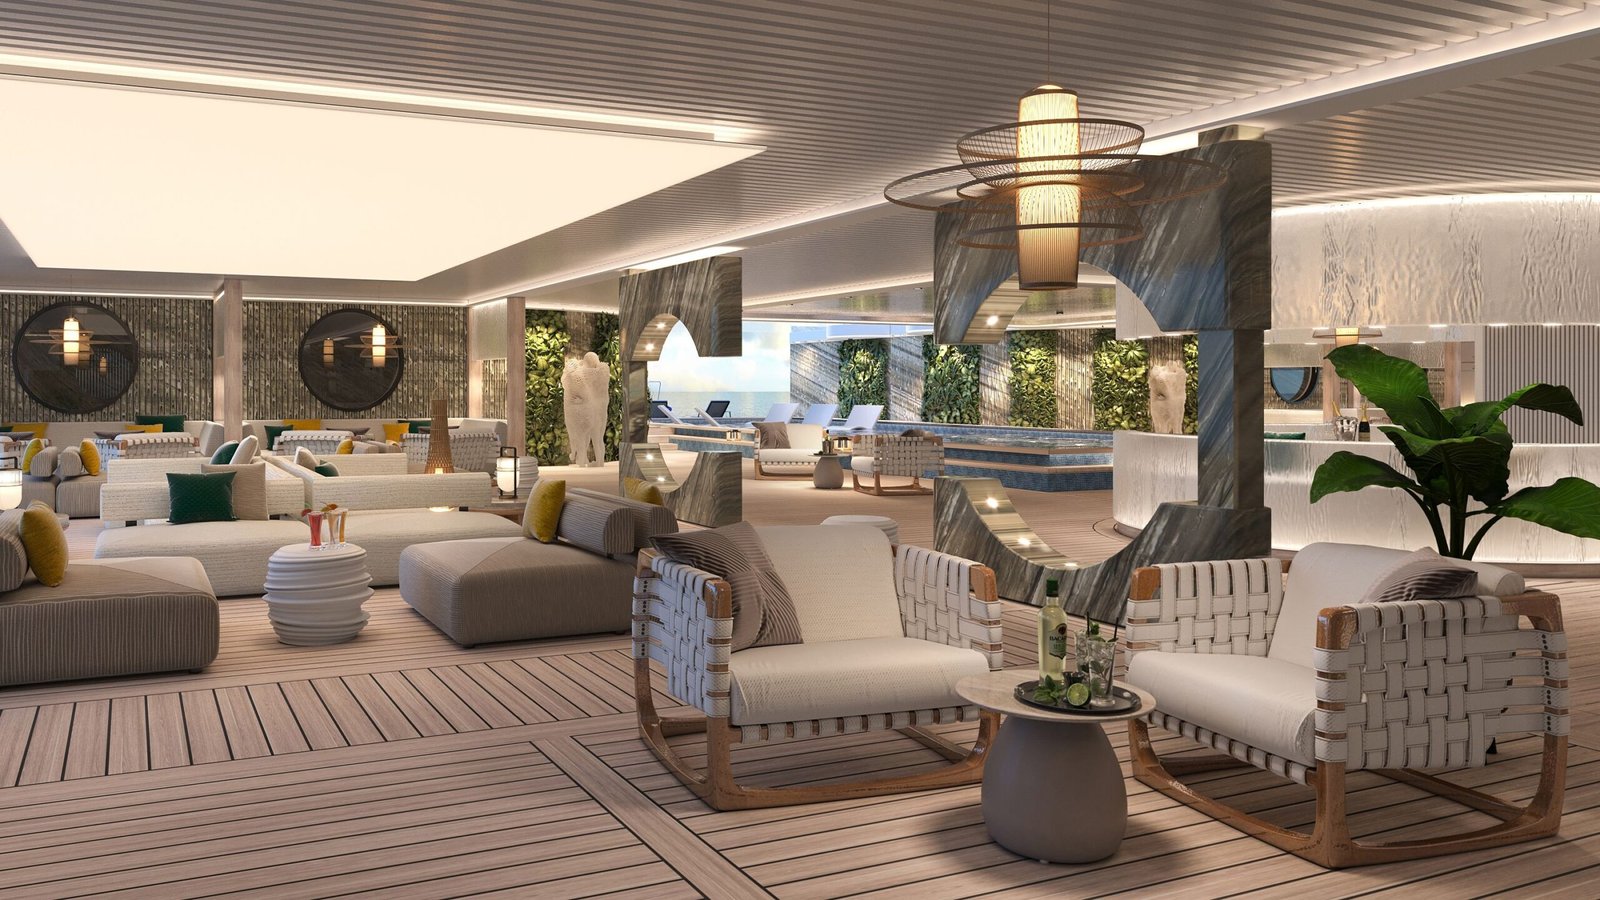 Explore the World on a Sustainable Residential Cruise with Storylines